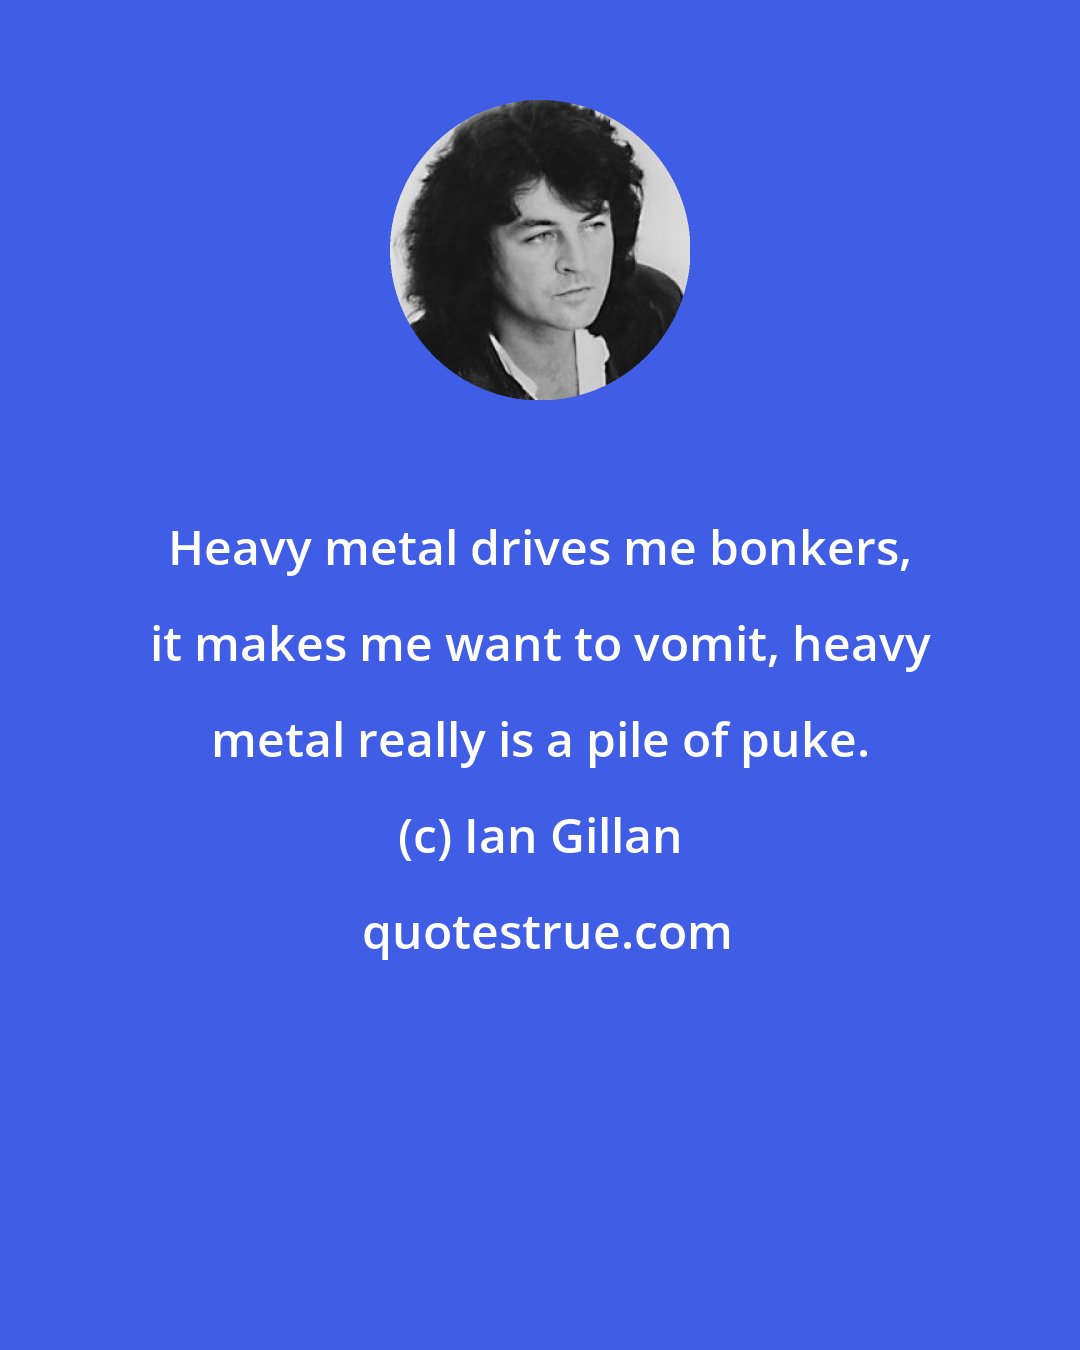 Ian Gillan: Heavy metal drives me bonkers, it makes me want to vomit, heavy metal really is a pile of puke.